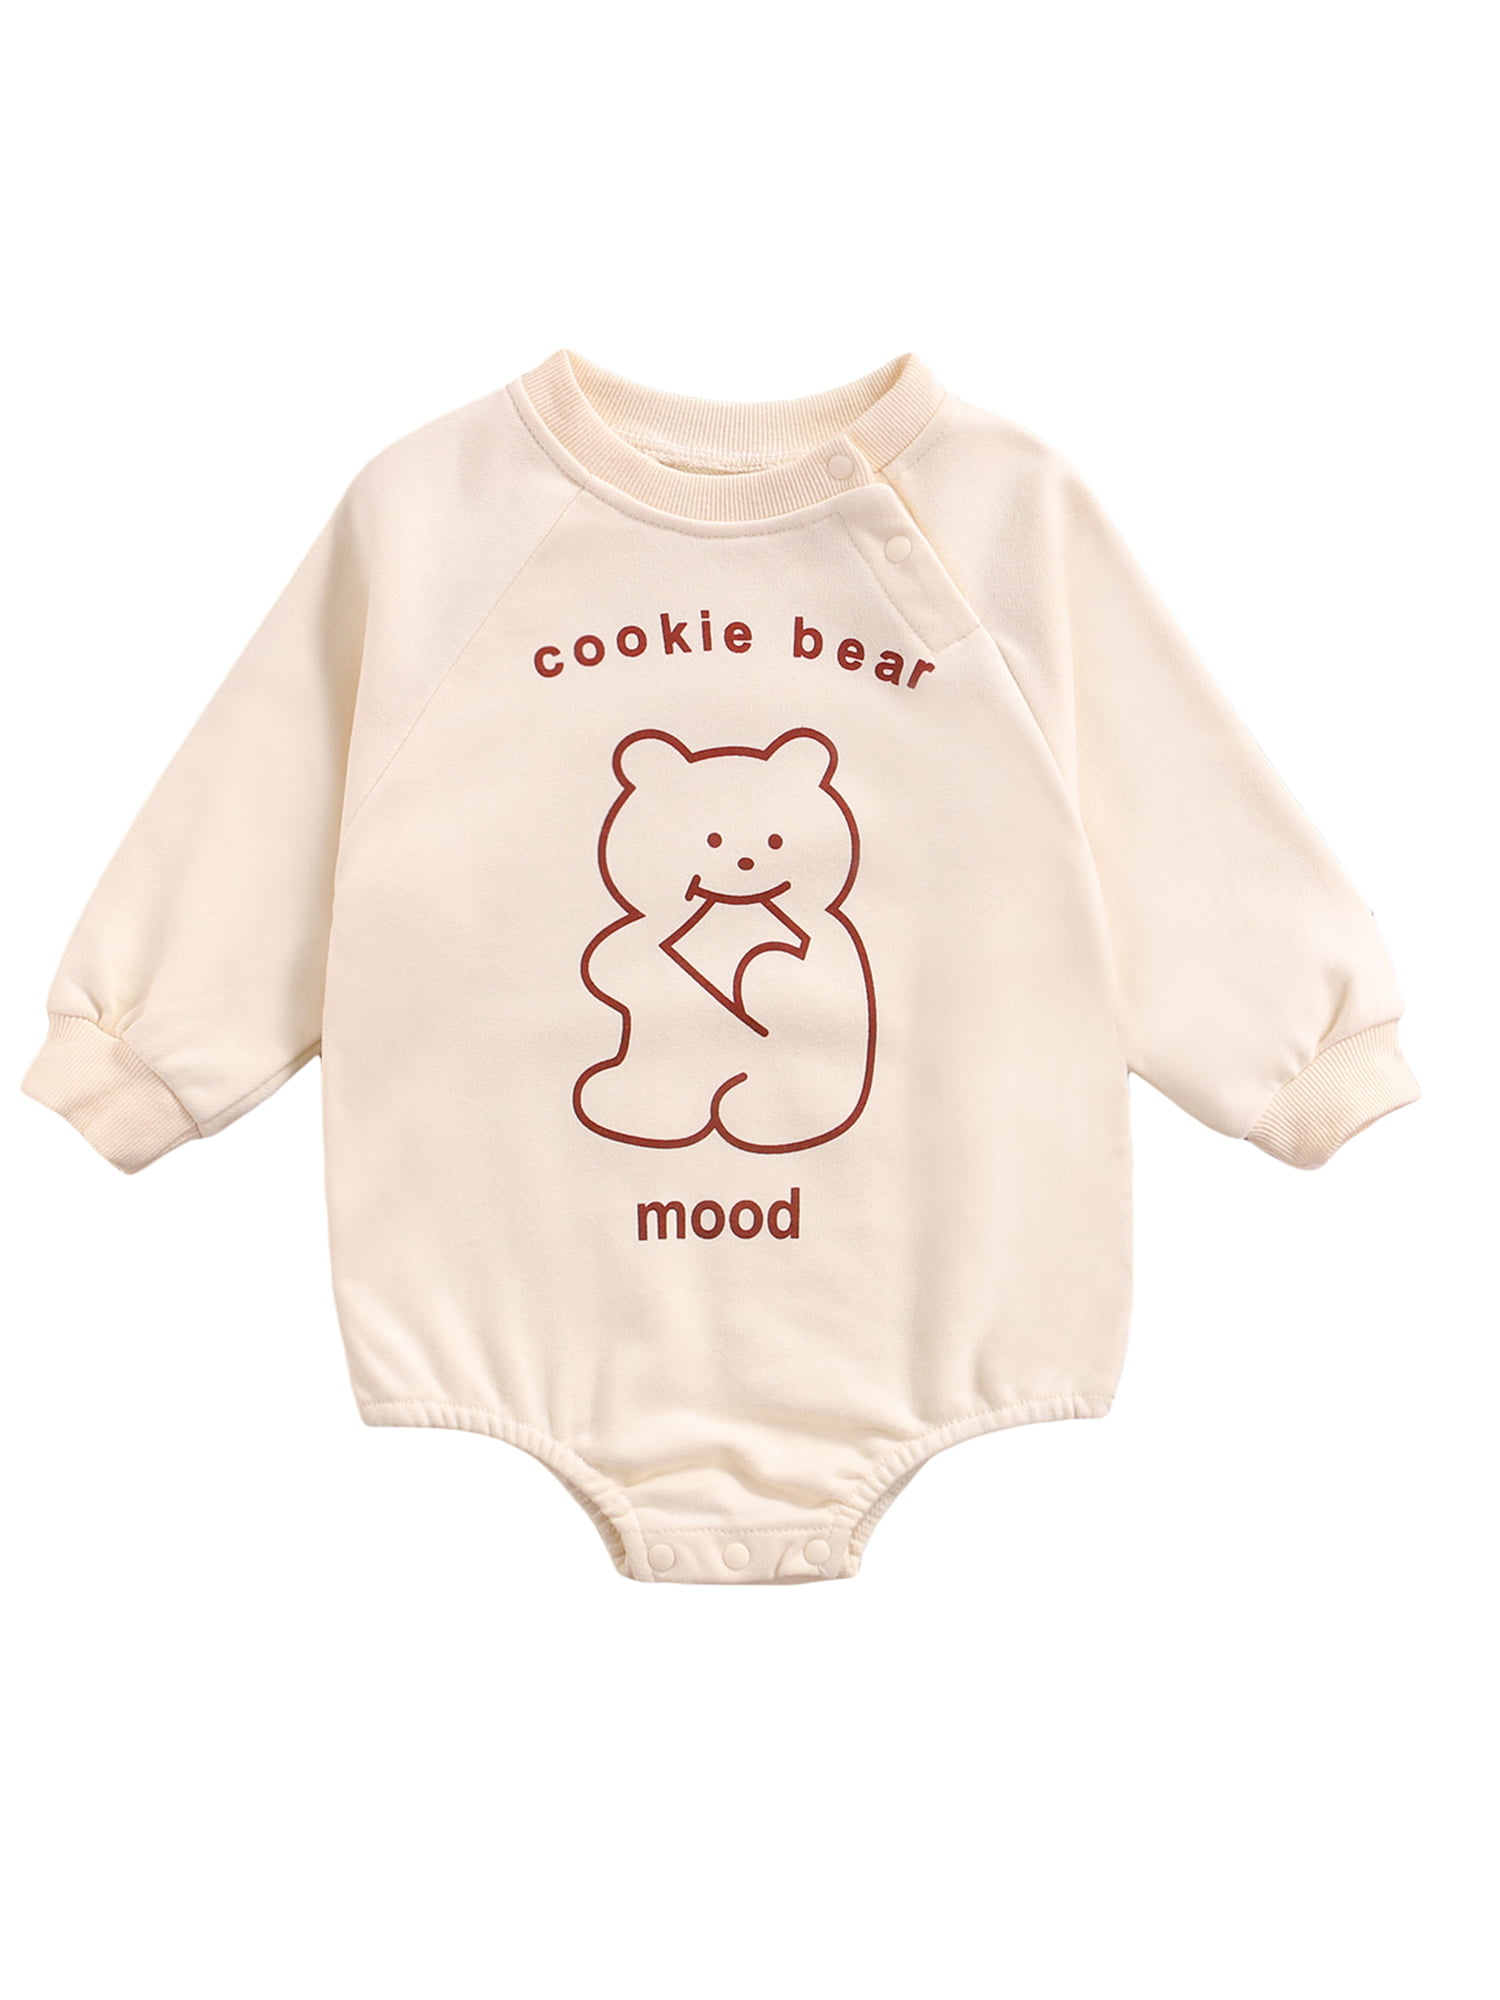 Baby Boy Girl Autumn Rompers Long-Sleeves 4pcs Letters Cartoon Clothes Sets 